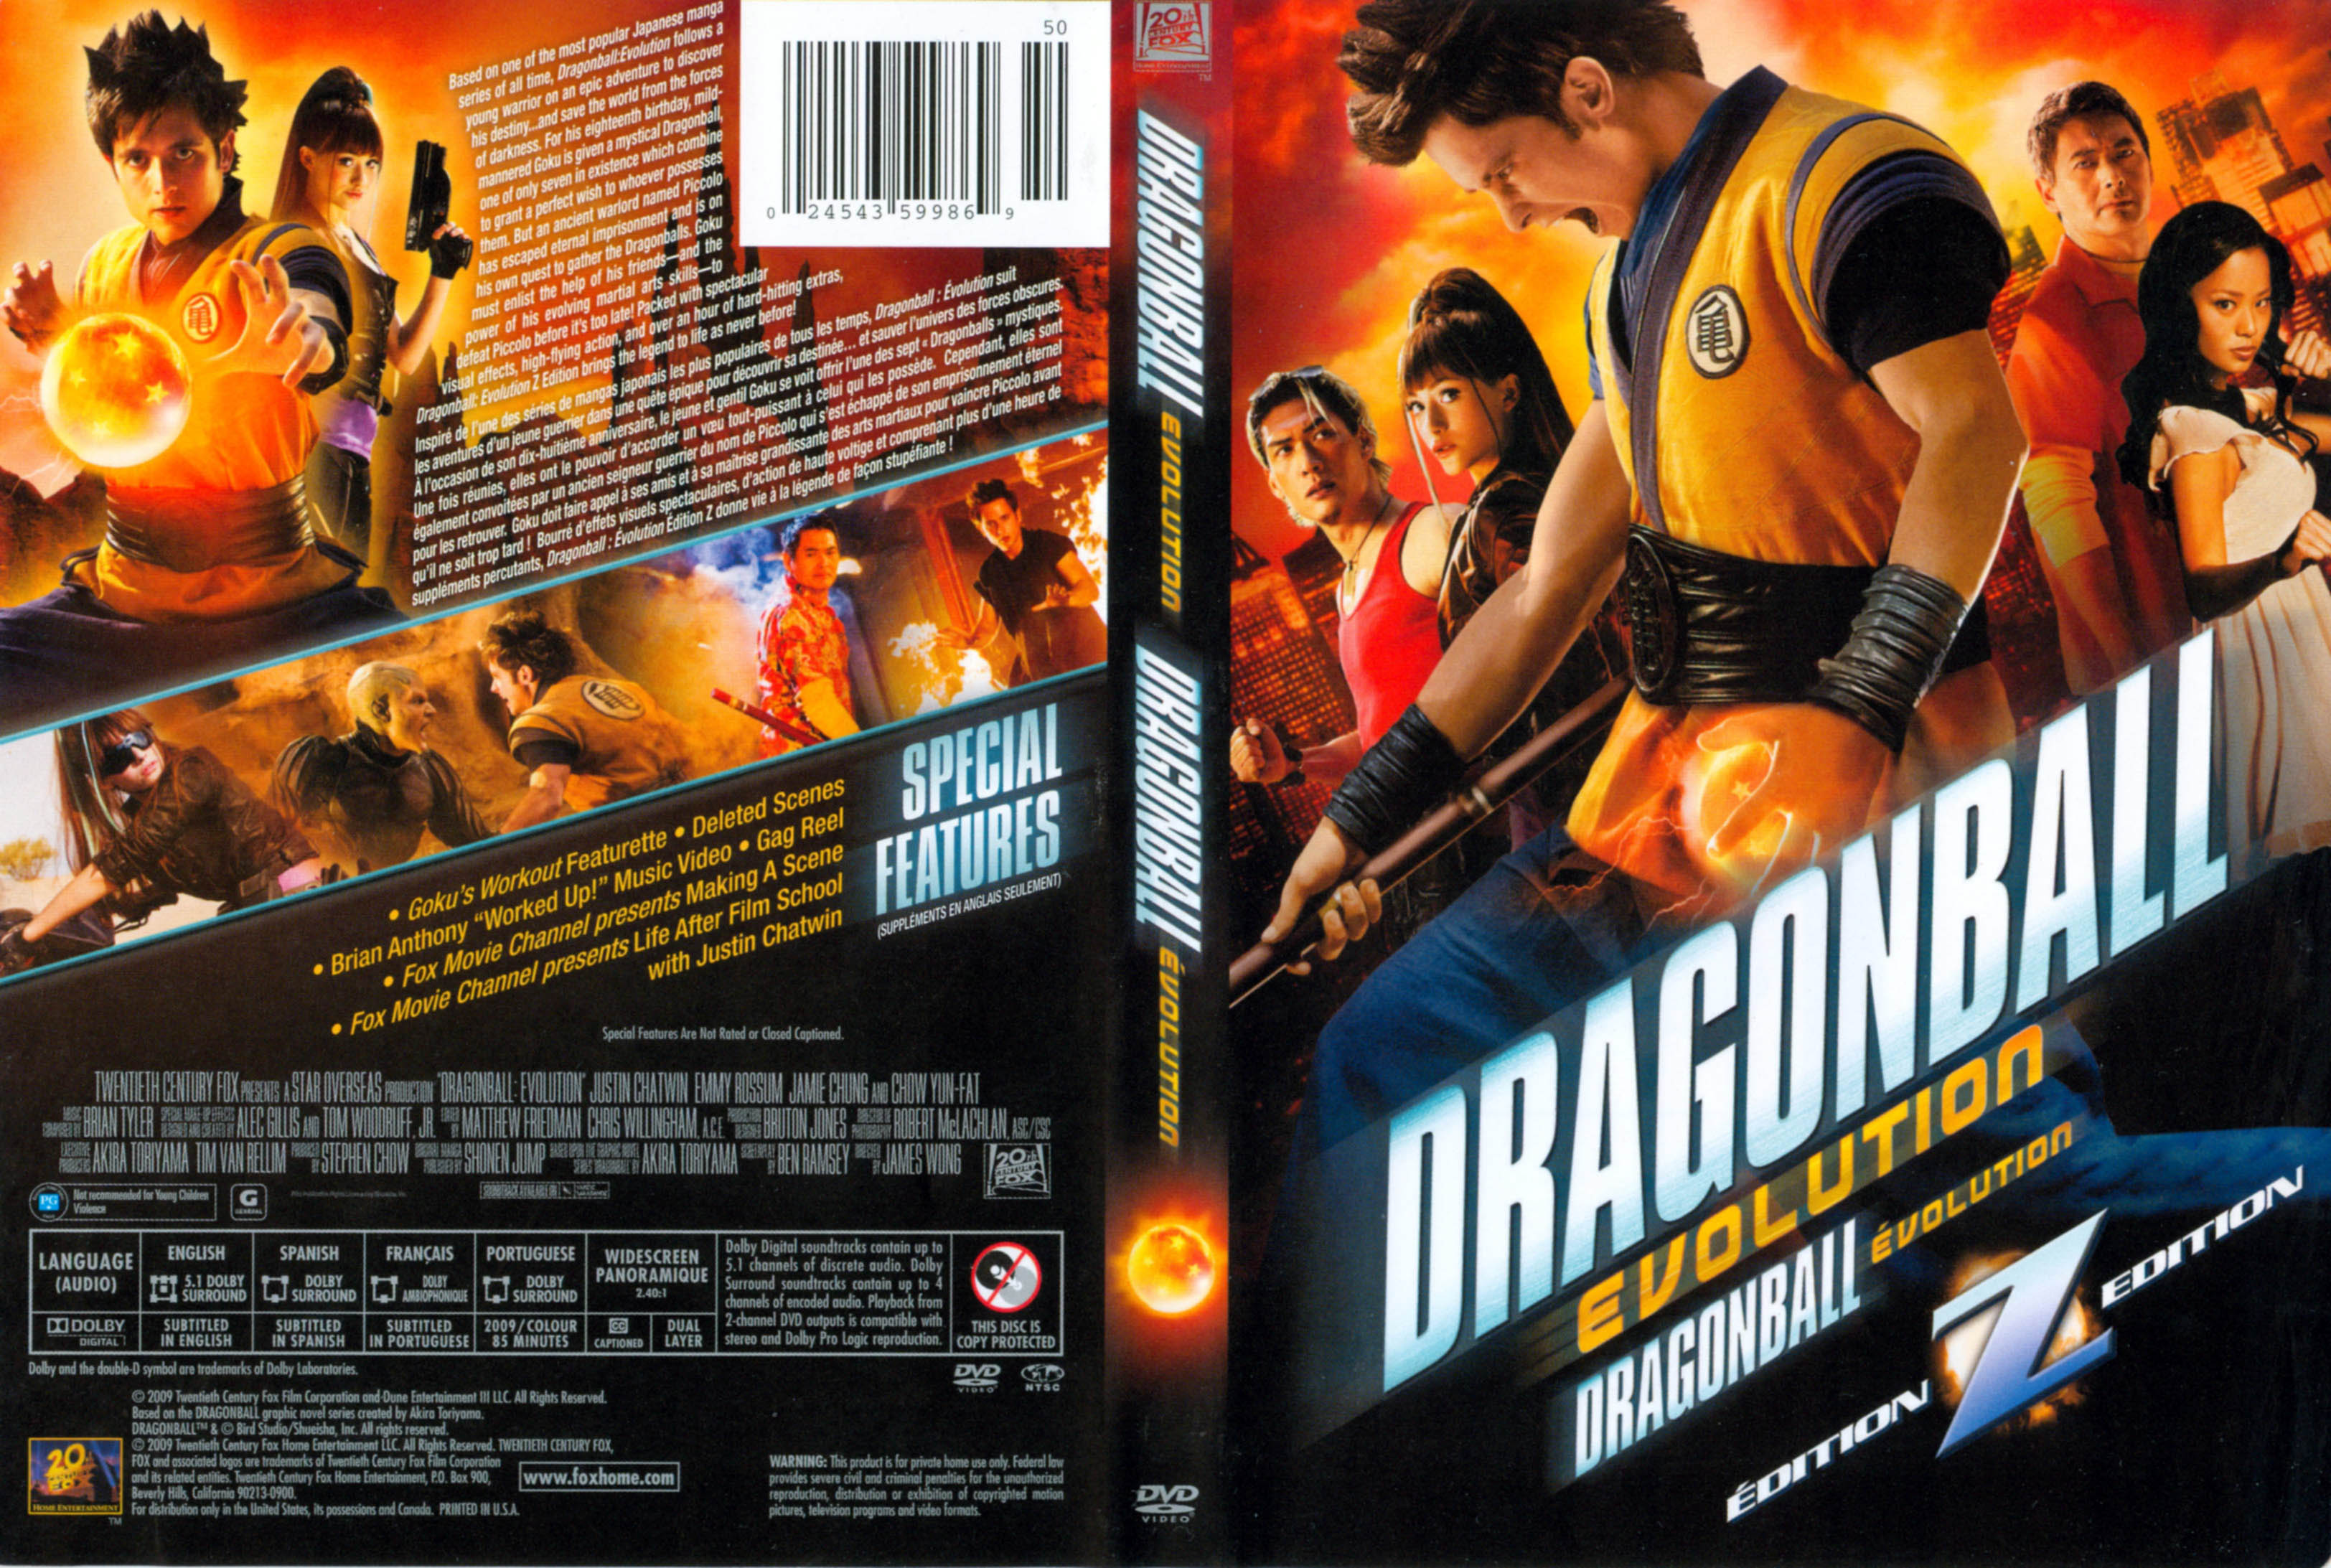 Jaquette DVD Dragonball evolution (Canadienne)